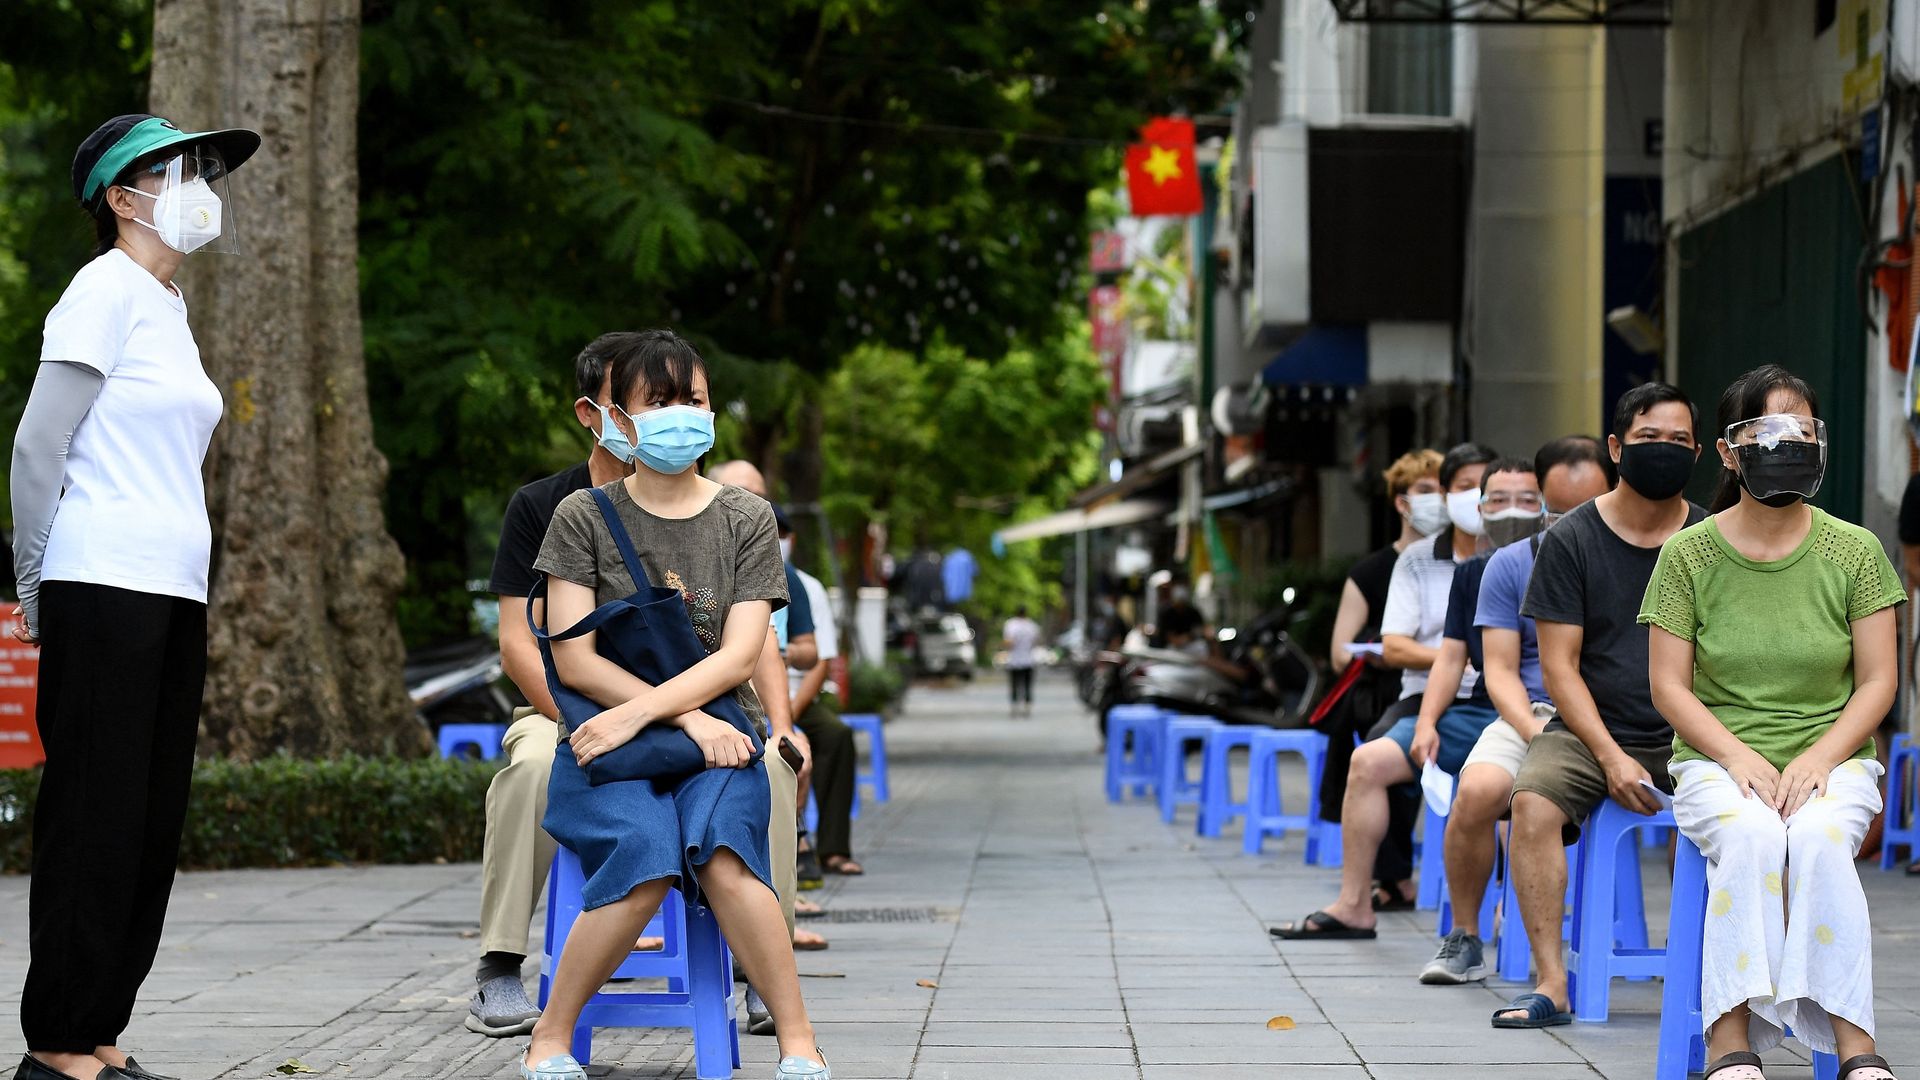 Residents wait to provide swab samples for Covid-19 testing along a street in Hanoi on August 18, 2021,